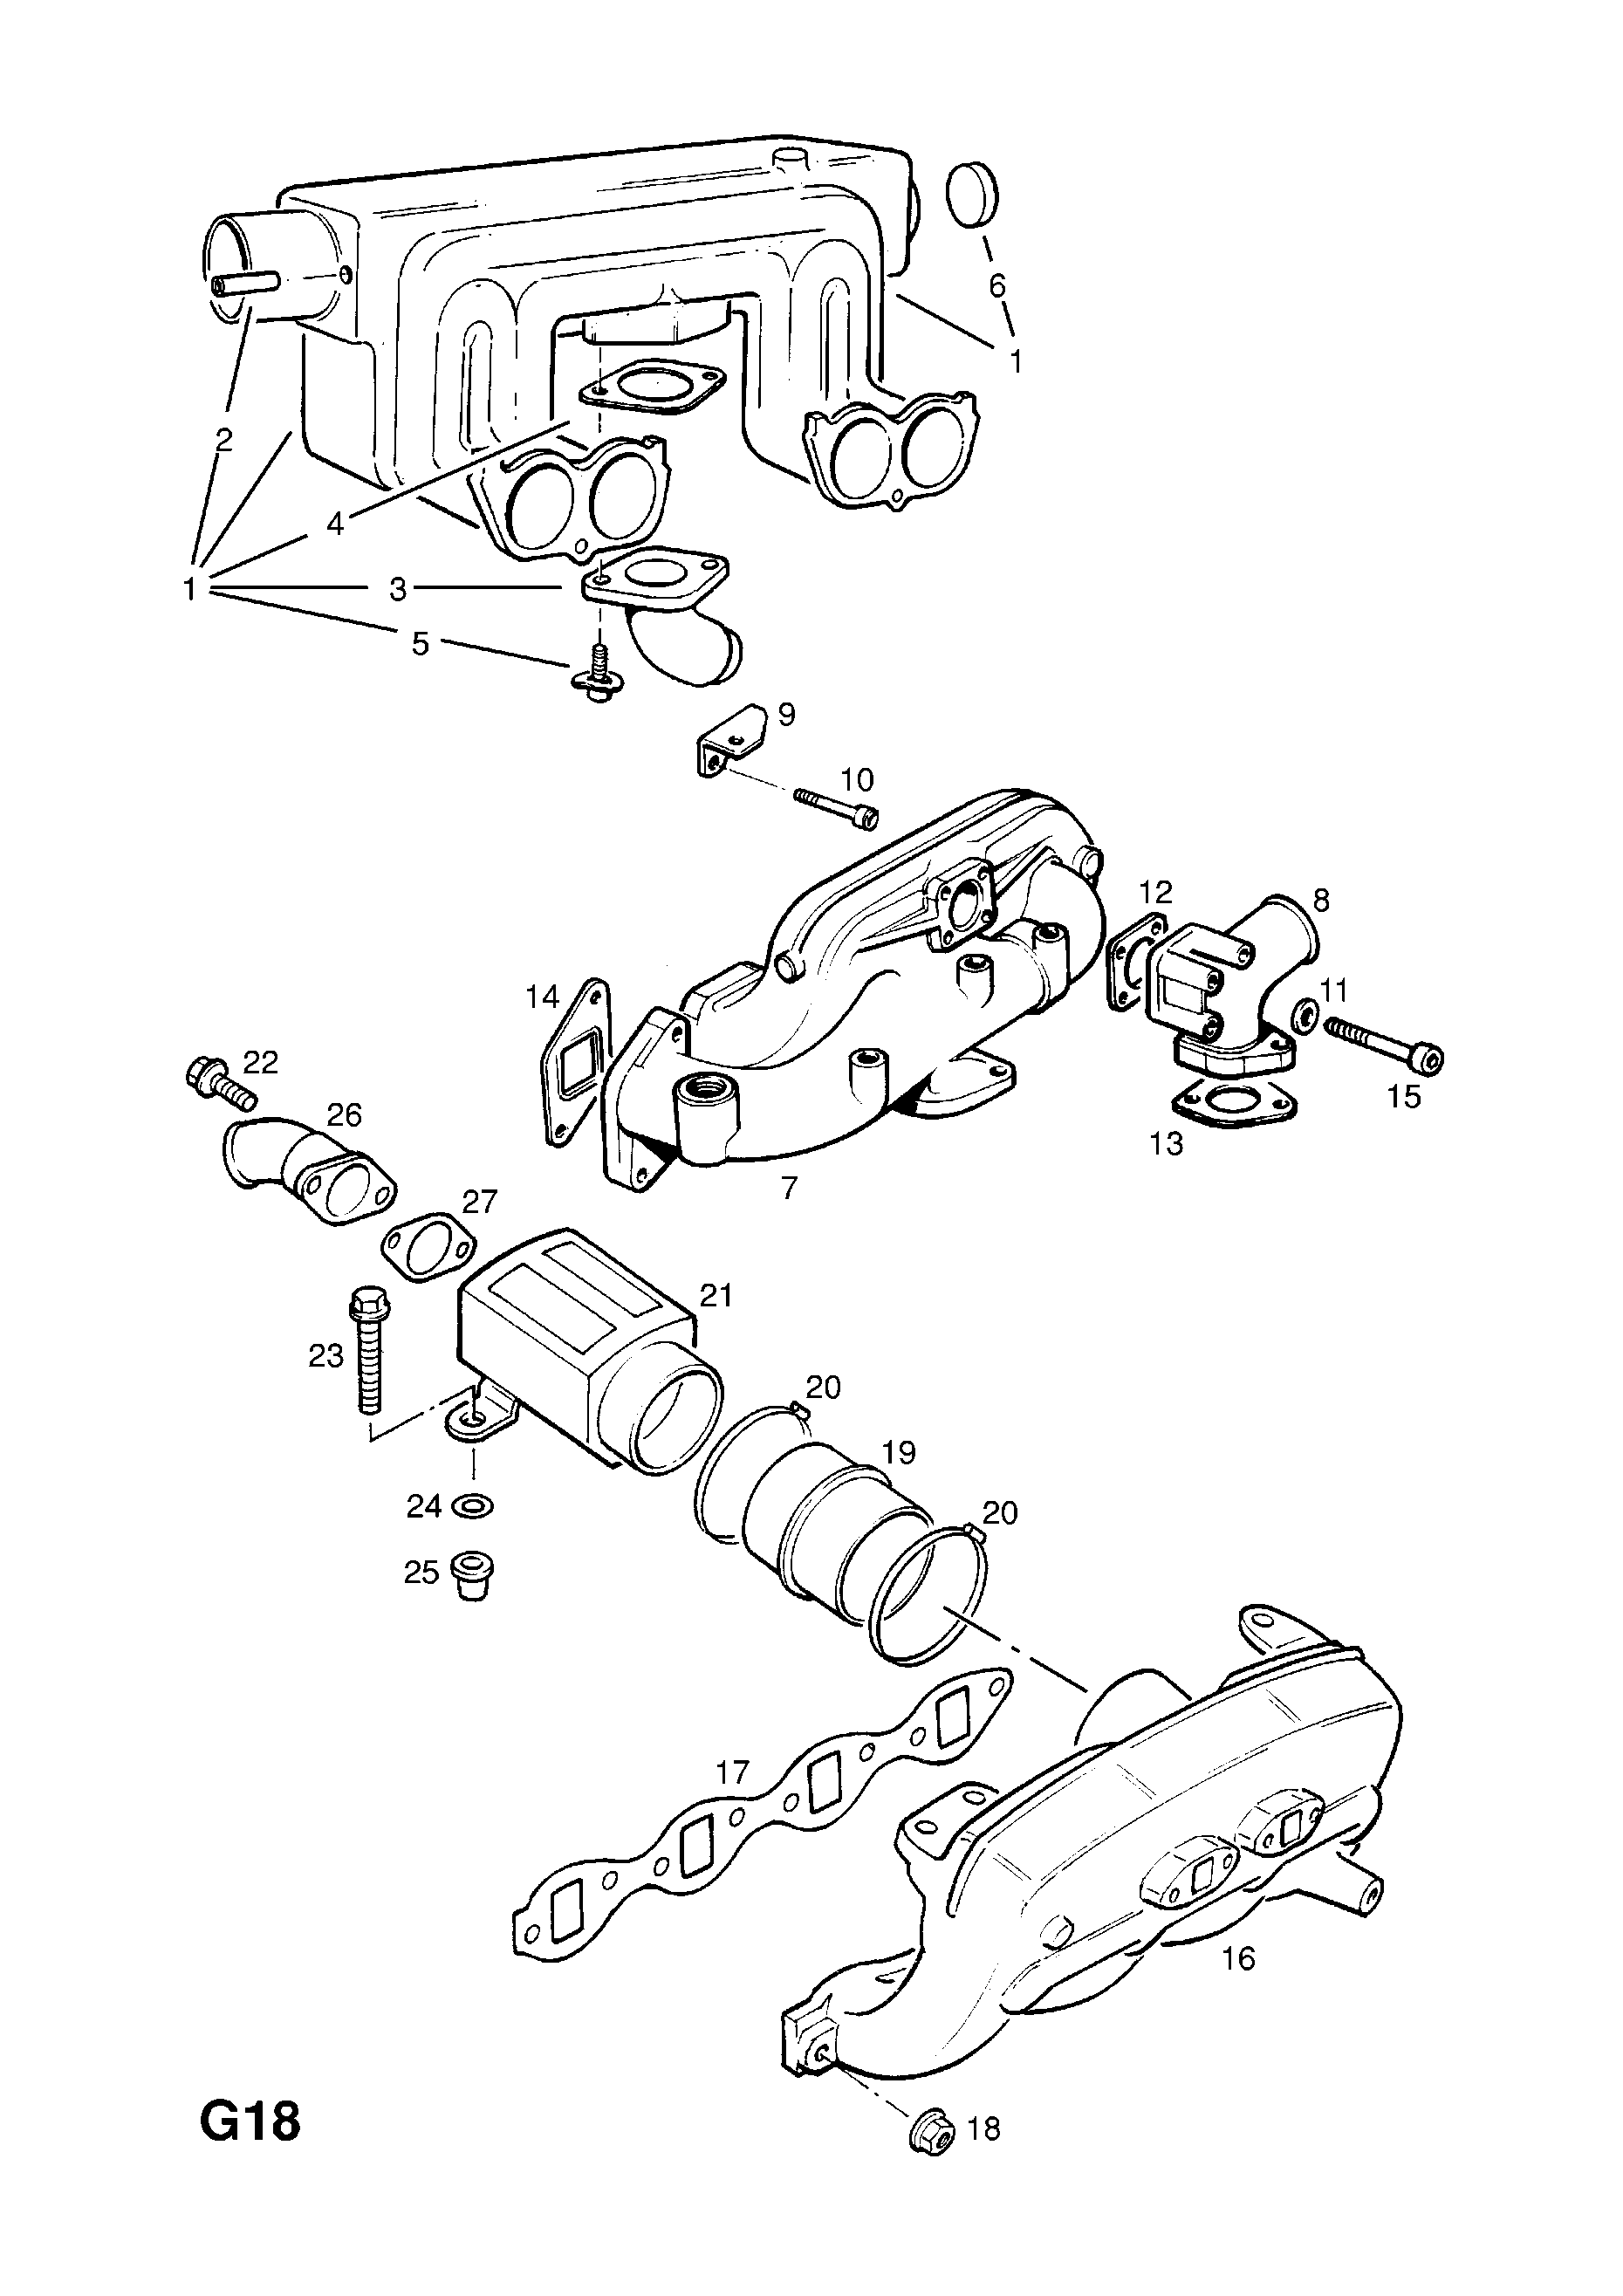 INDUCTION MANIFOLD (CONTD.) <small><i>[25TD DIESEL ENGINE]</i></small>